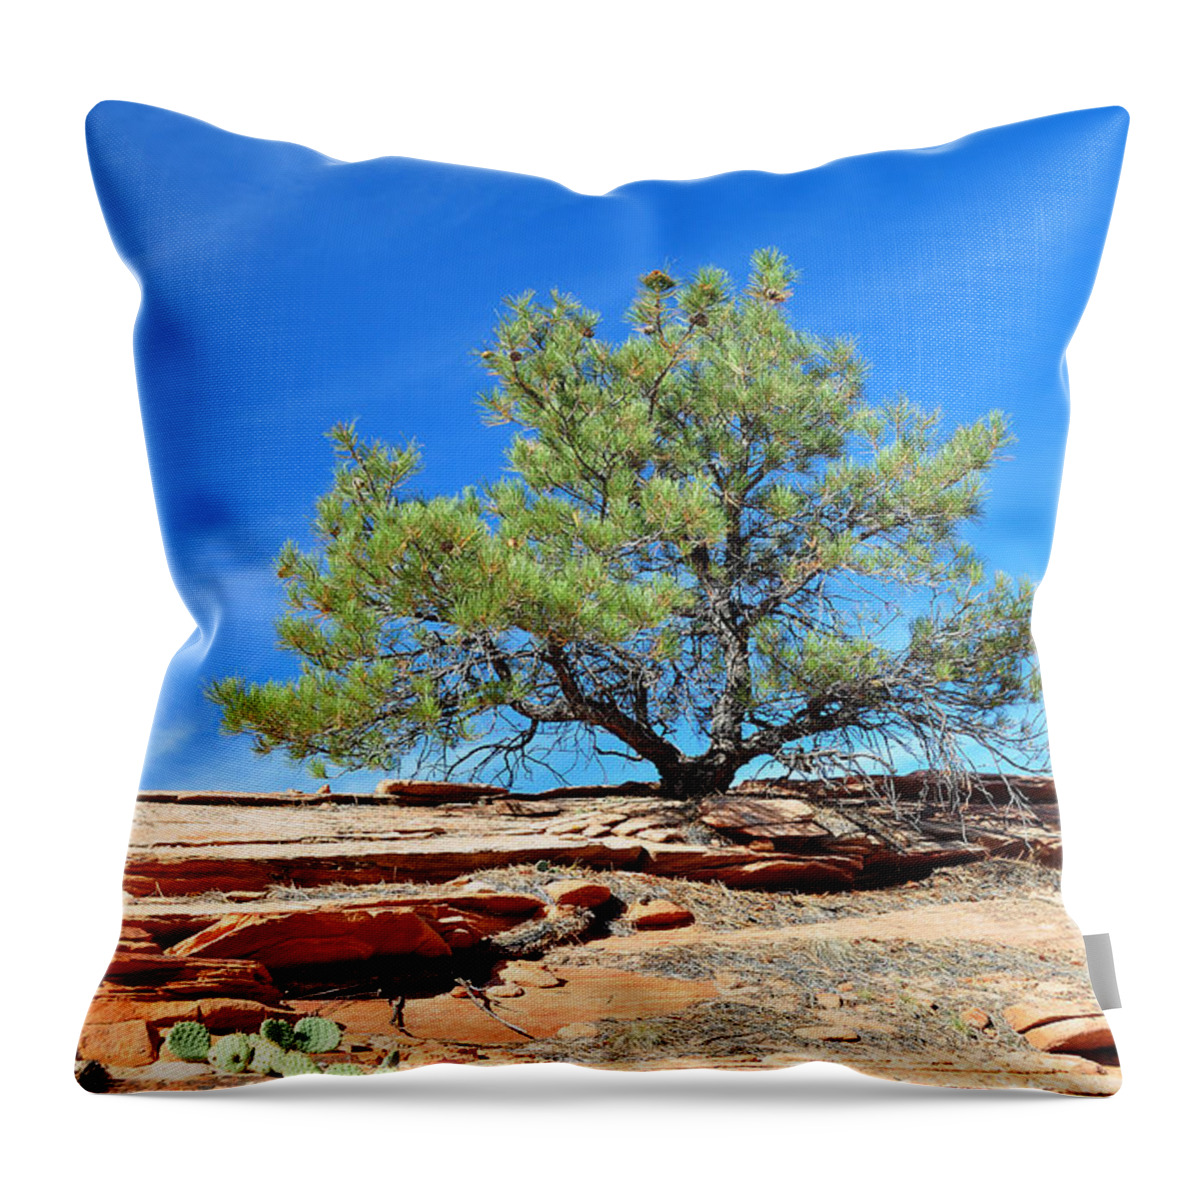 Zion Throw Pillow featuring the photograph Clinging Tree in Zion National Park by Bruce Gourley